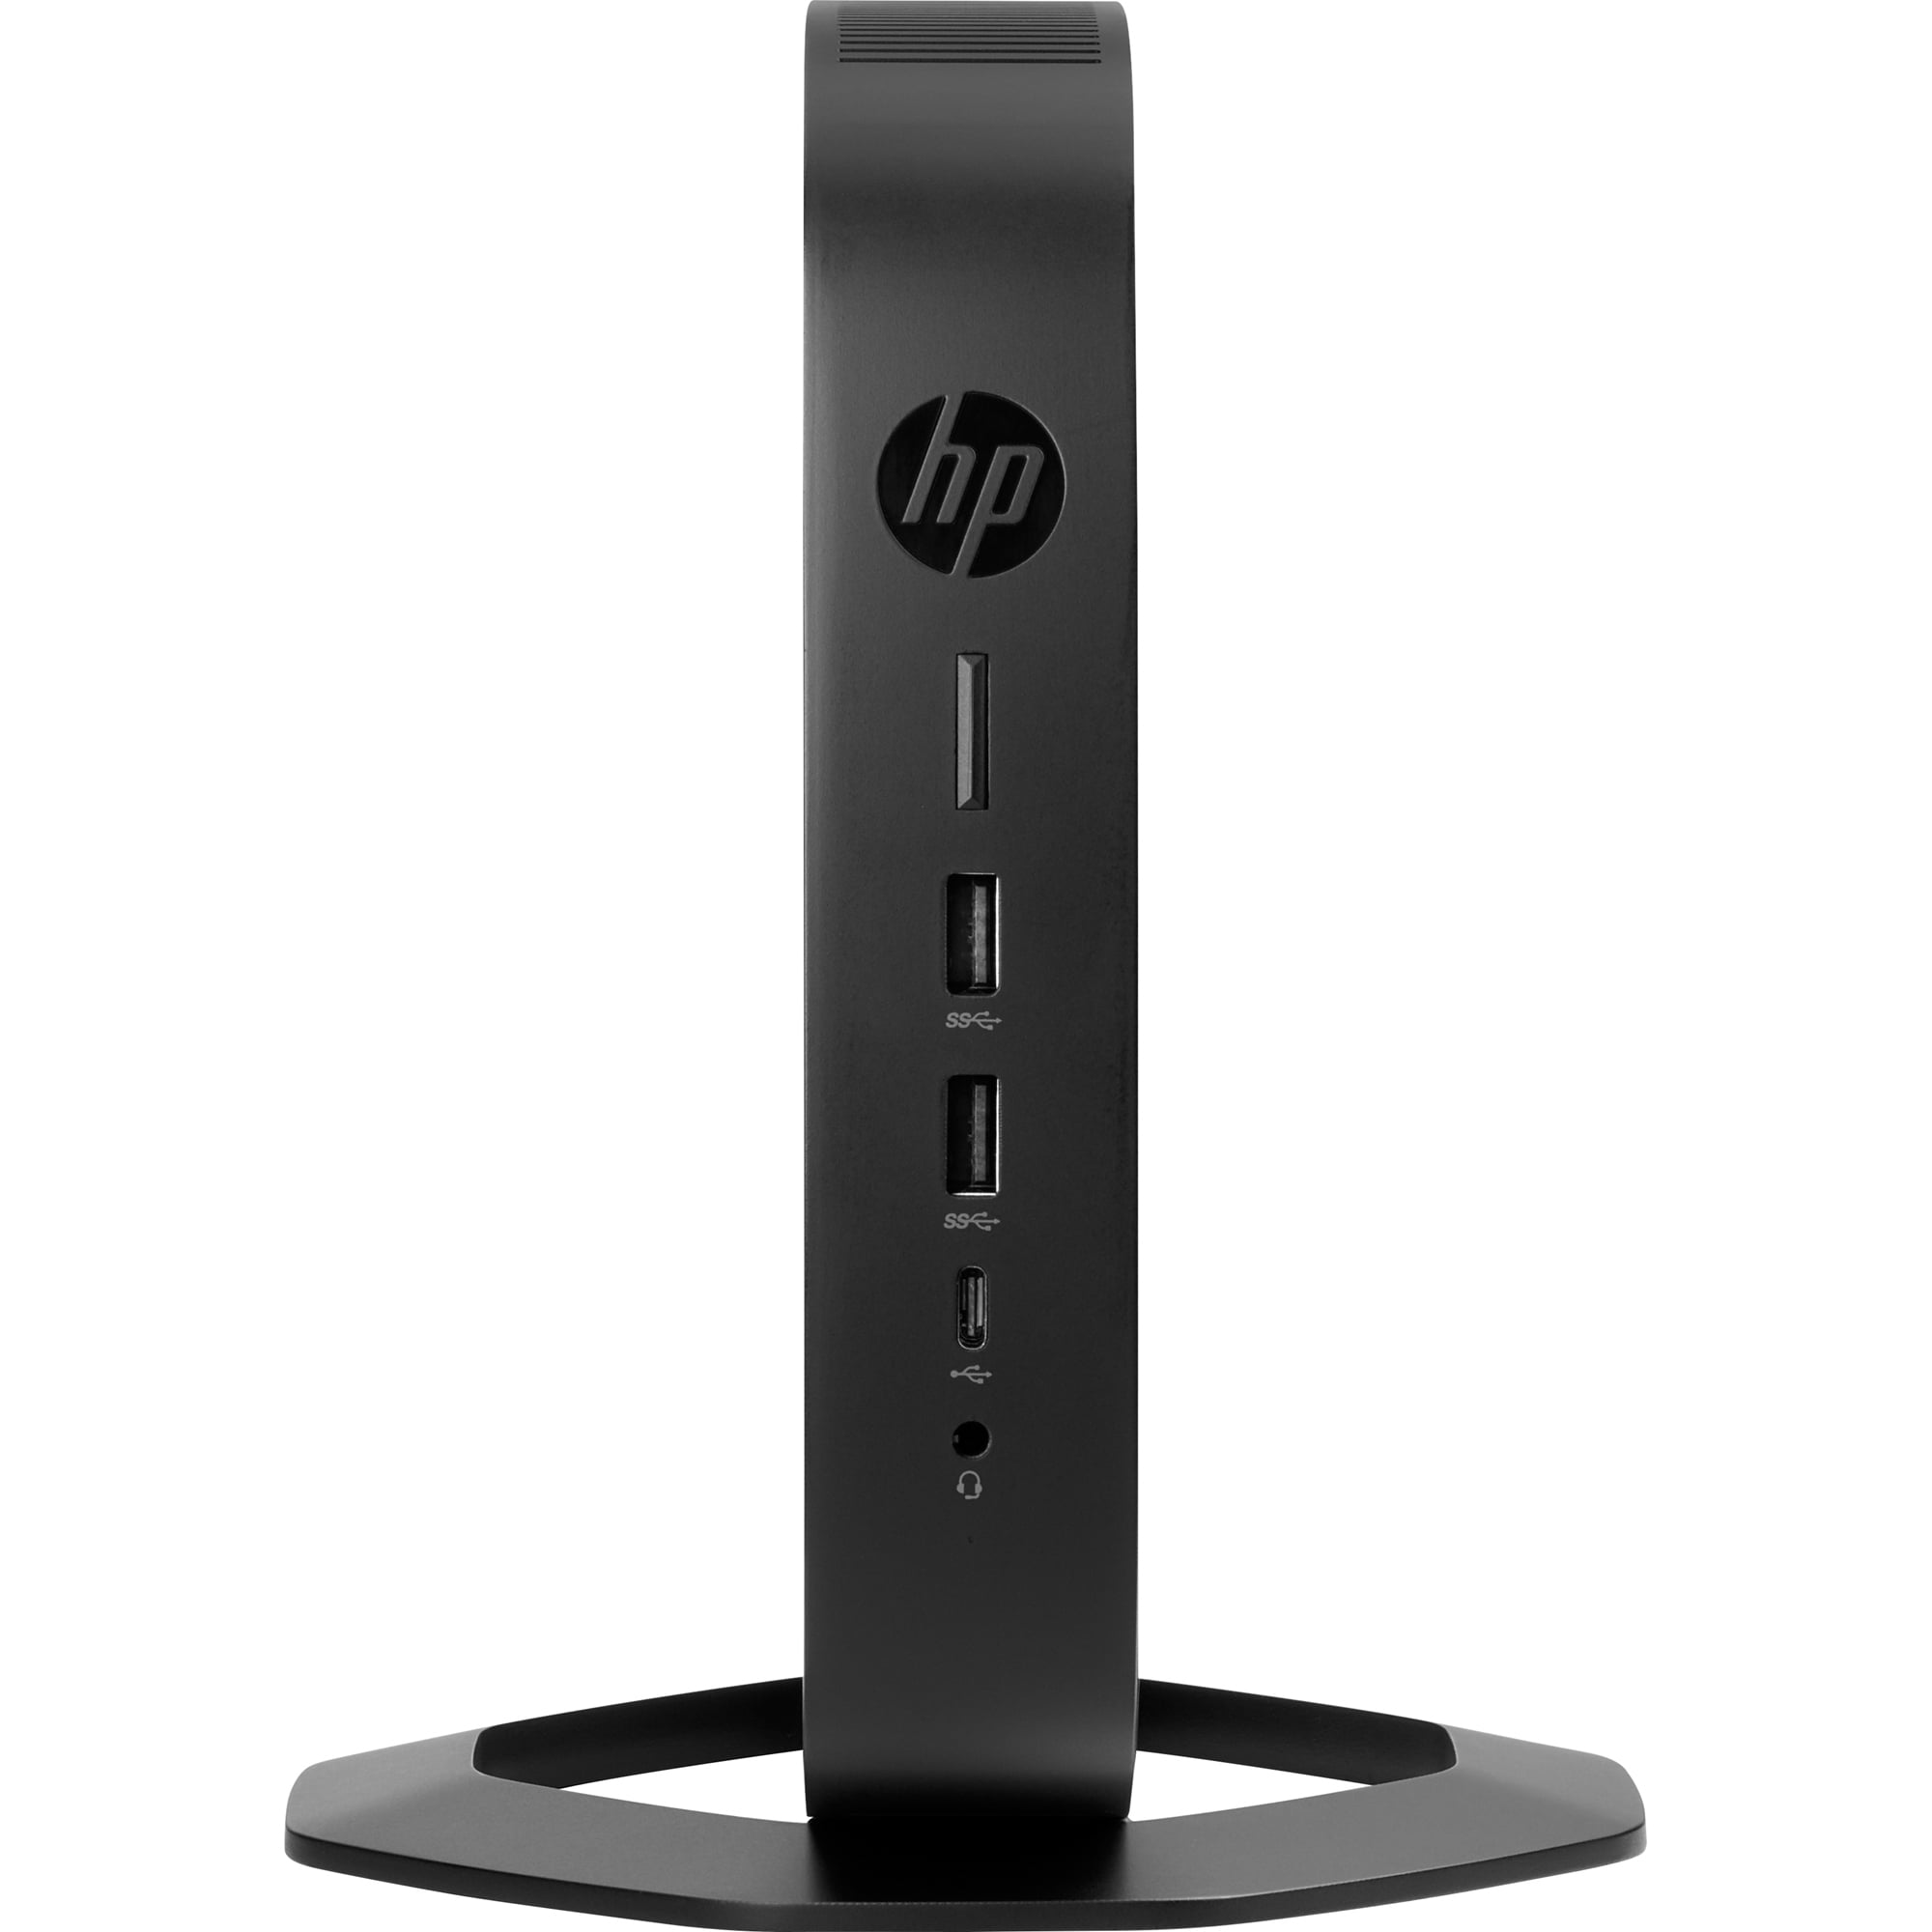 HP T630 THIN CLIENT GX-420GI 2.00GHZ 4GB 16GBSSD NO OS WITH WARRANTY 